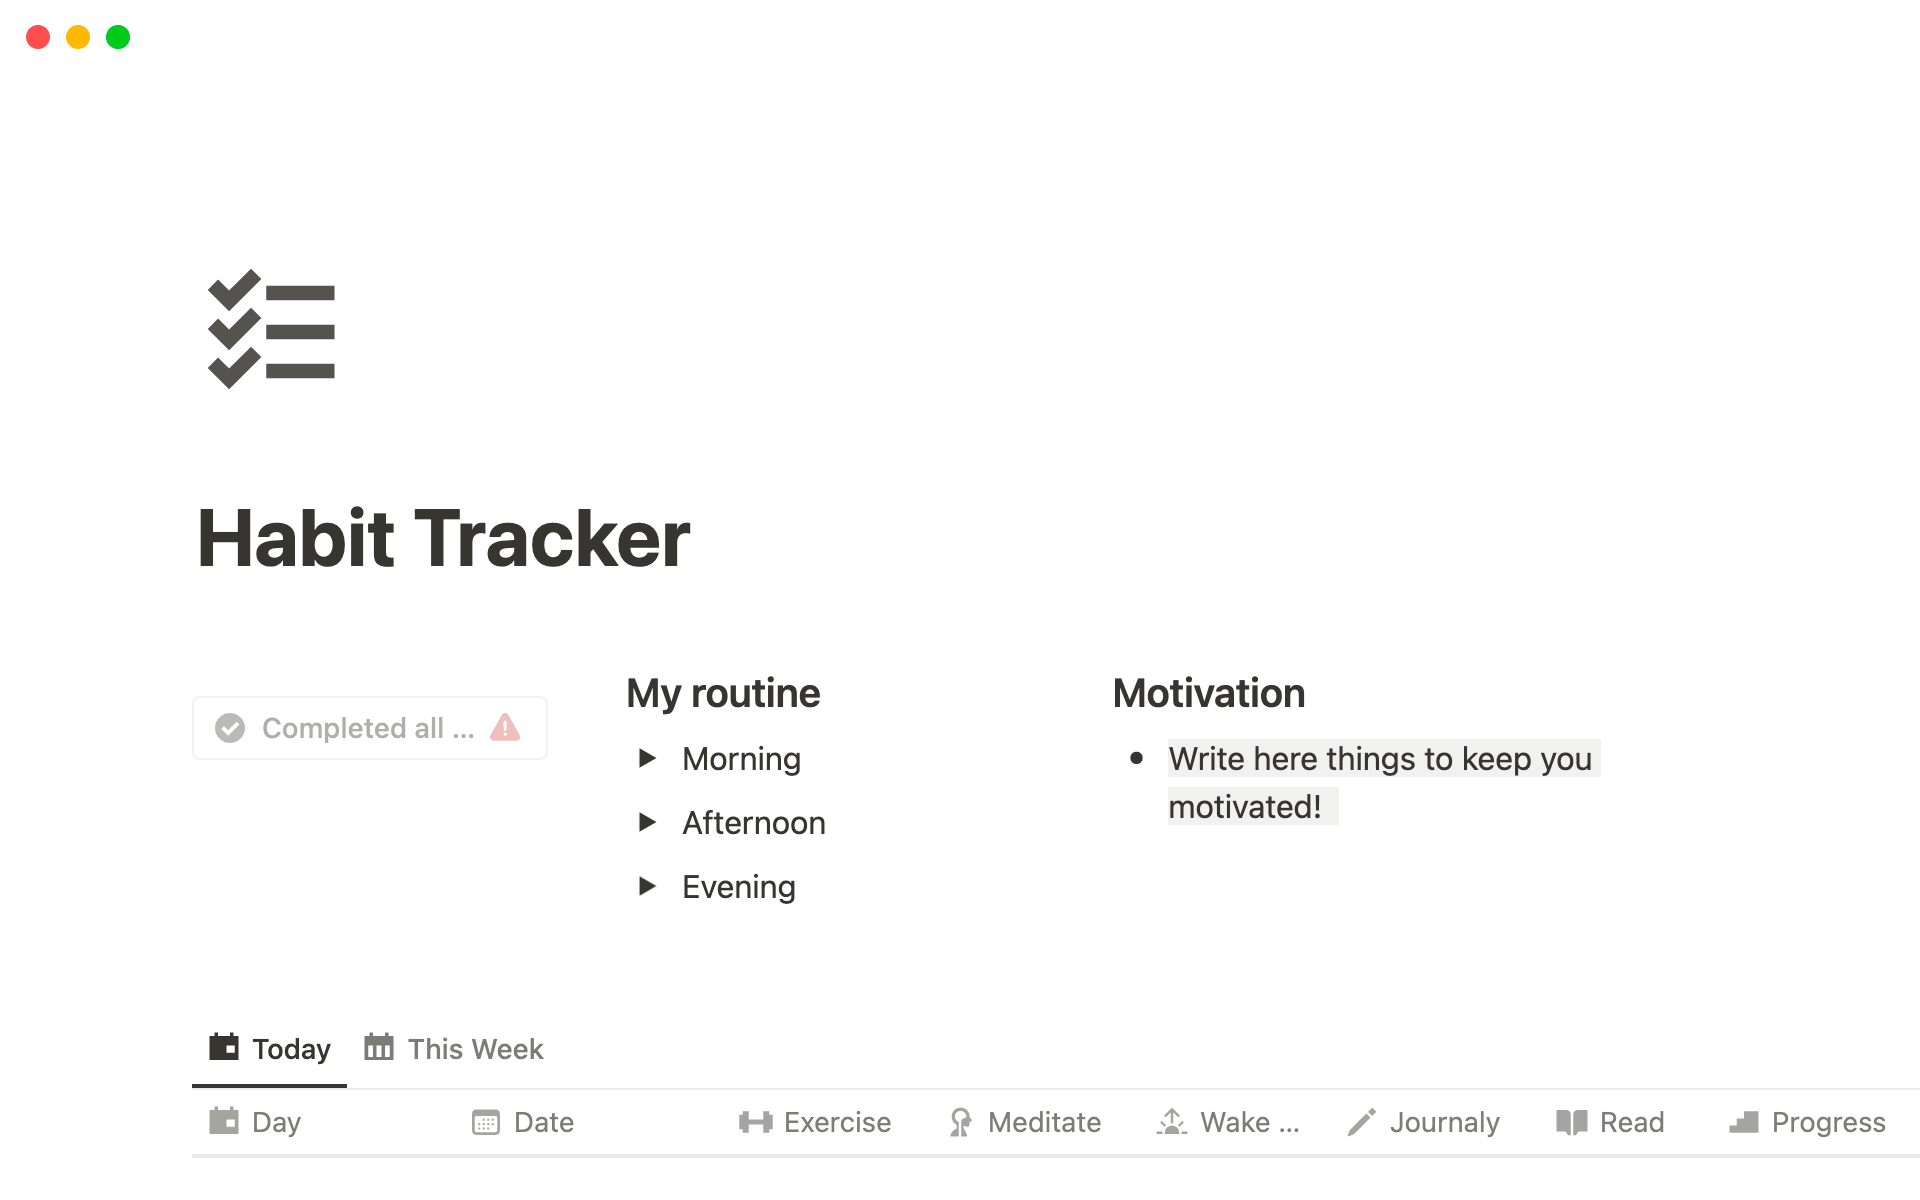 Our template simplifies daily habit tracking and visualization in Notion, empowering you to improve consistency and achieve personal growth.